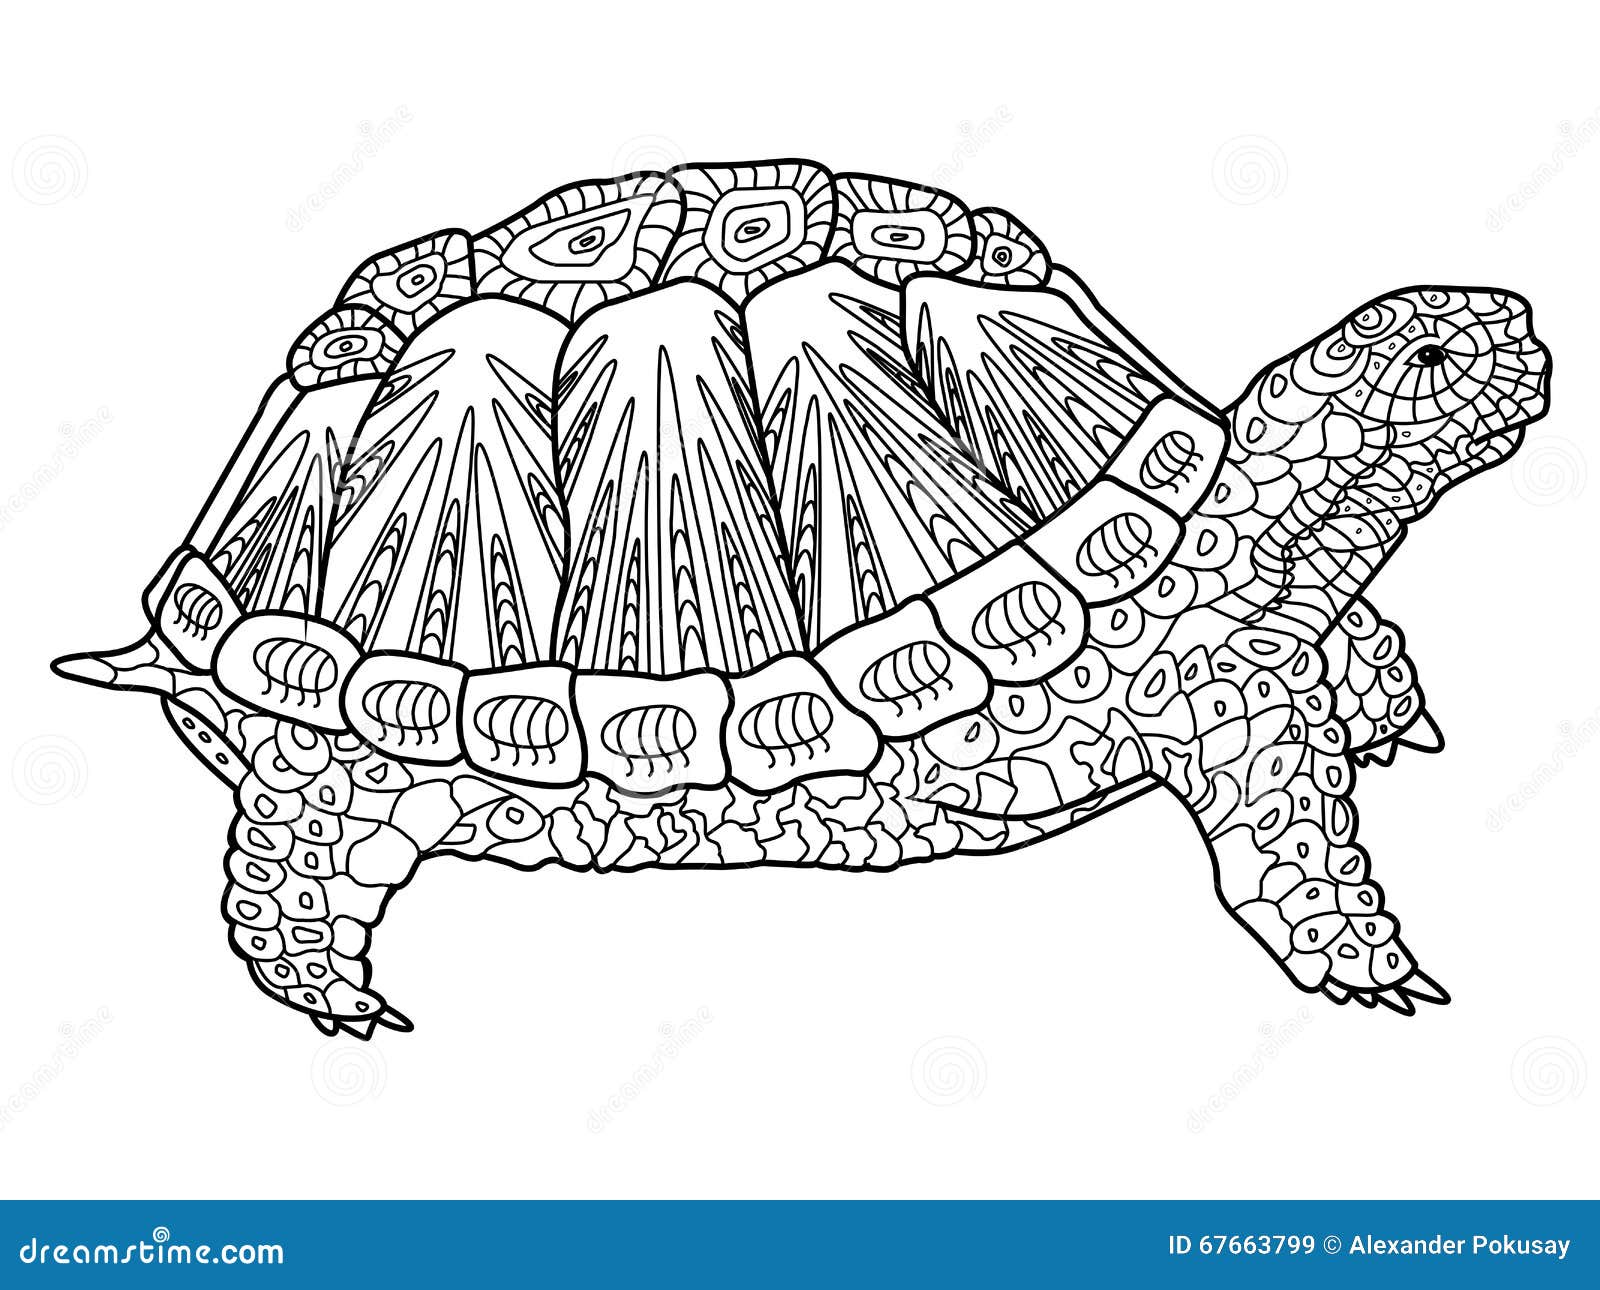 Premium Vector  A floating turtle coloring page turtles handdrawn for  relaxation and stress relief coloring book for adults with doodles  zentangle design elements